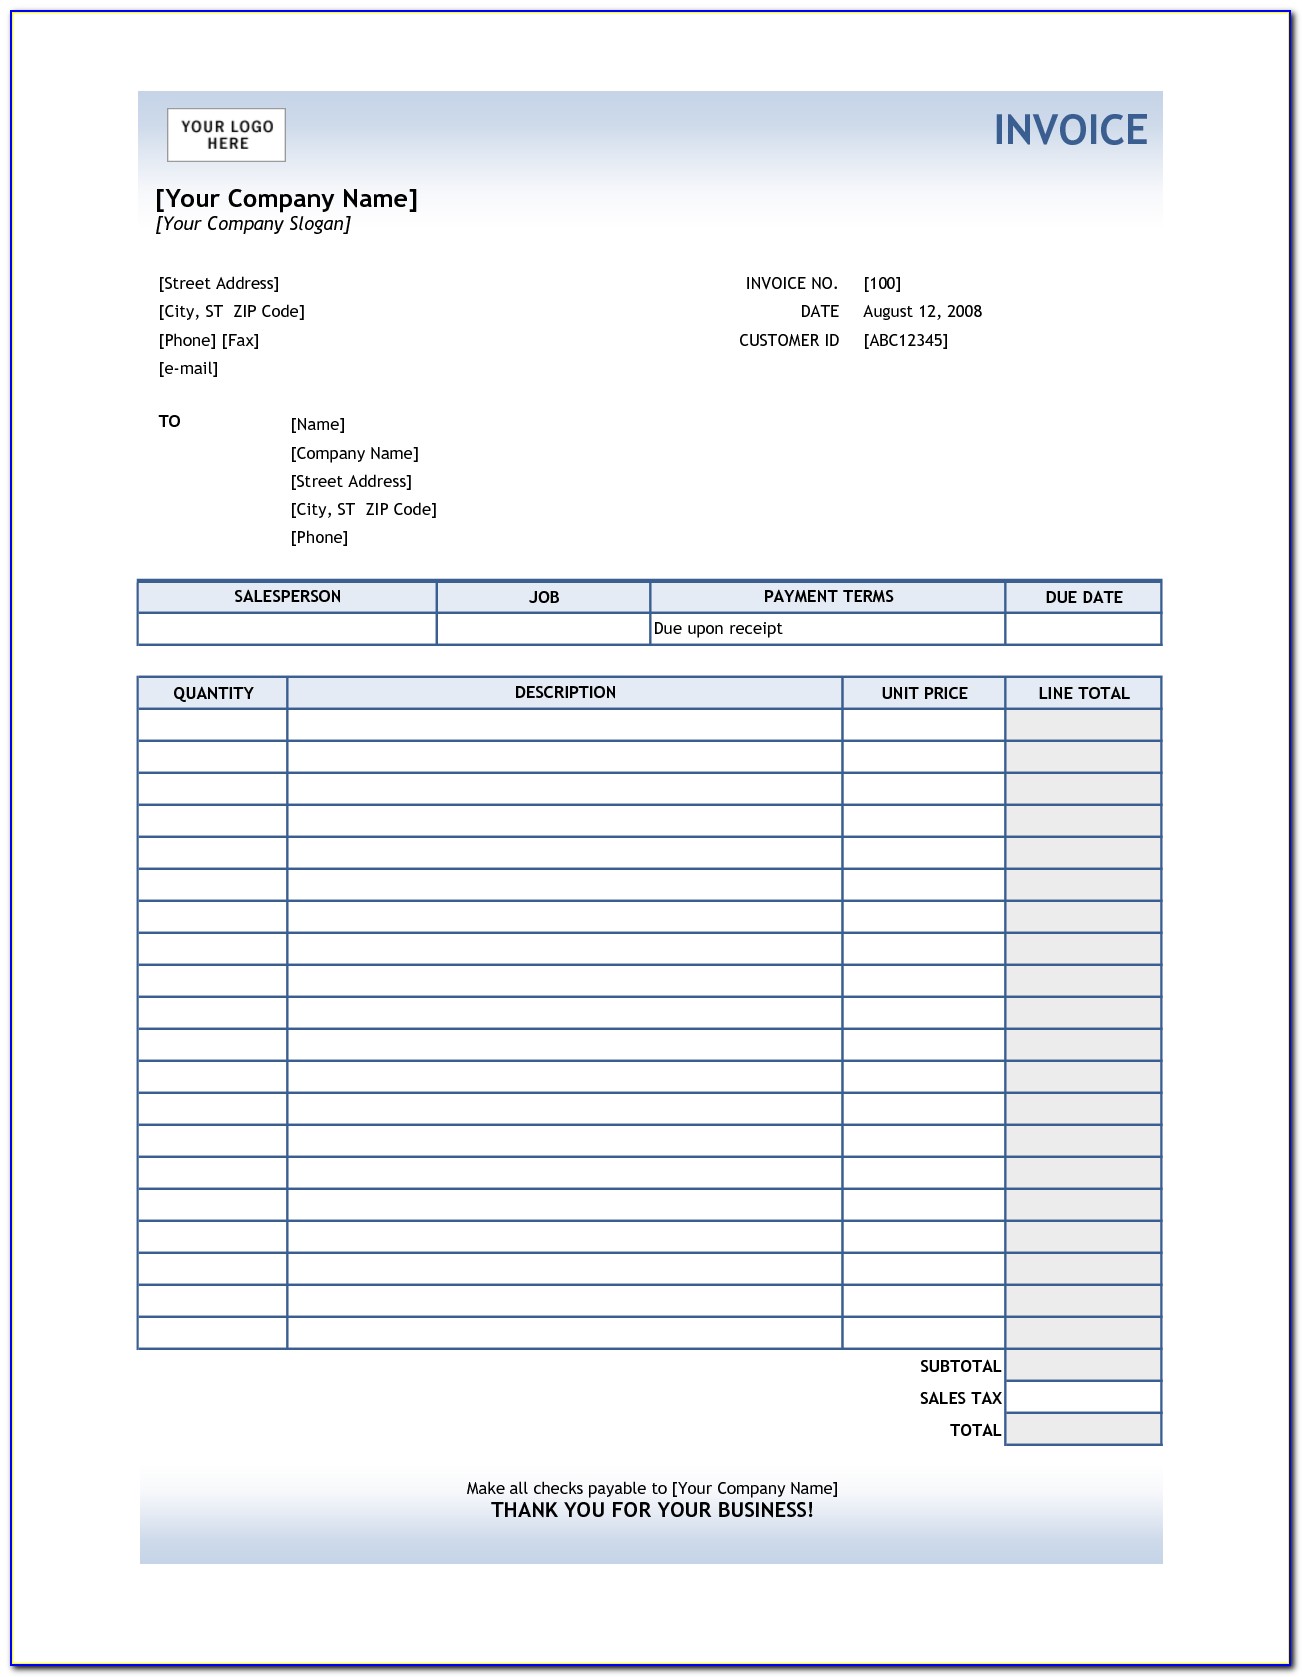 Free Download Invoice Format Excel Sheet